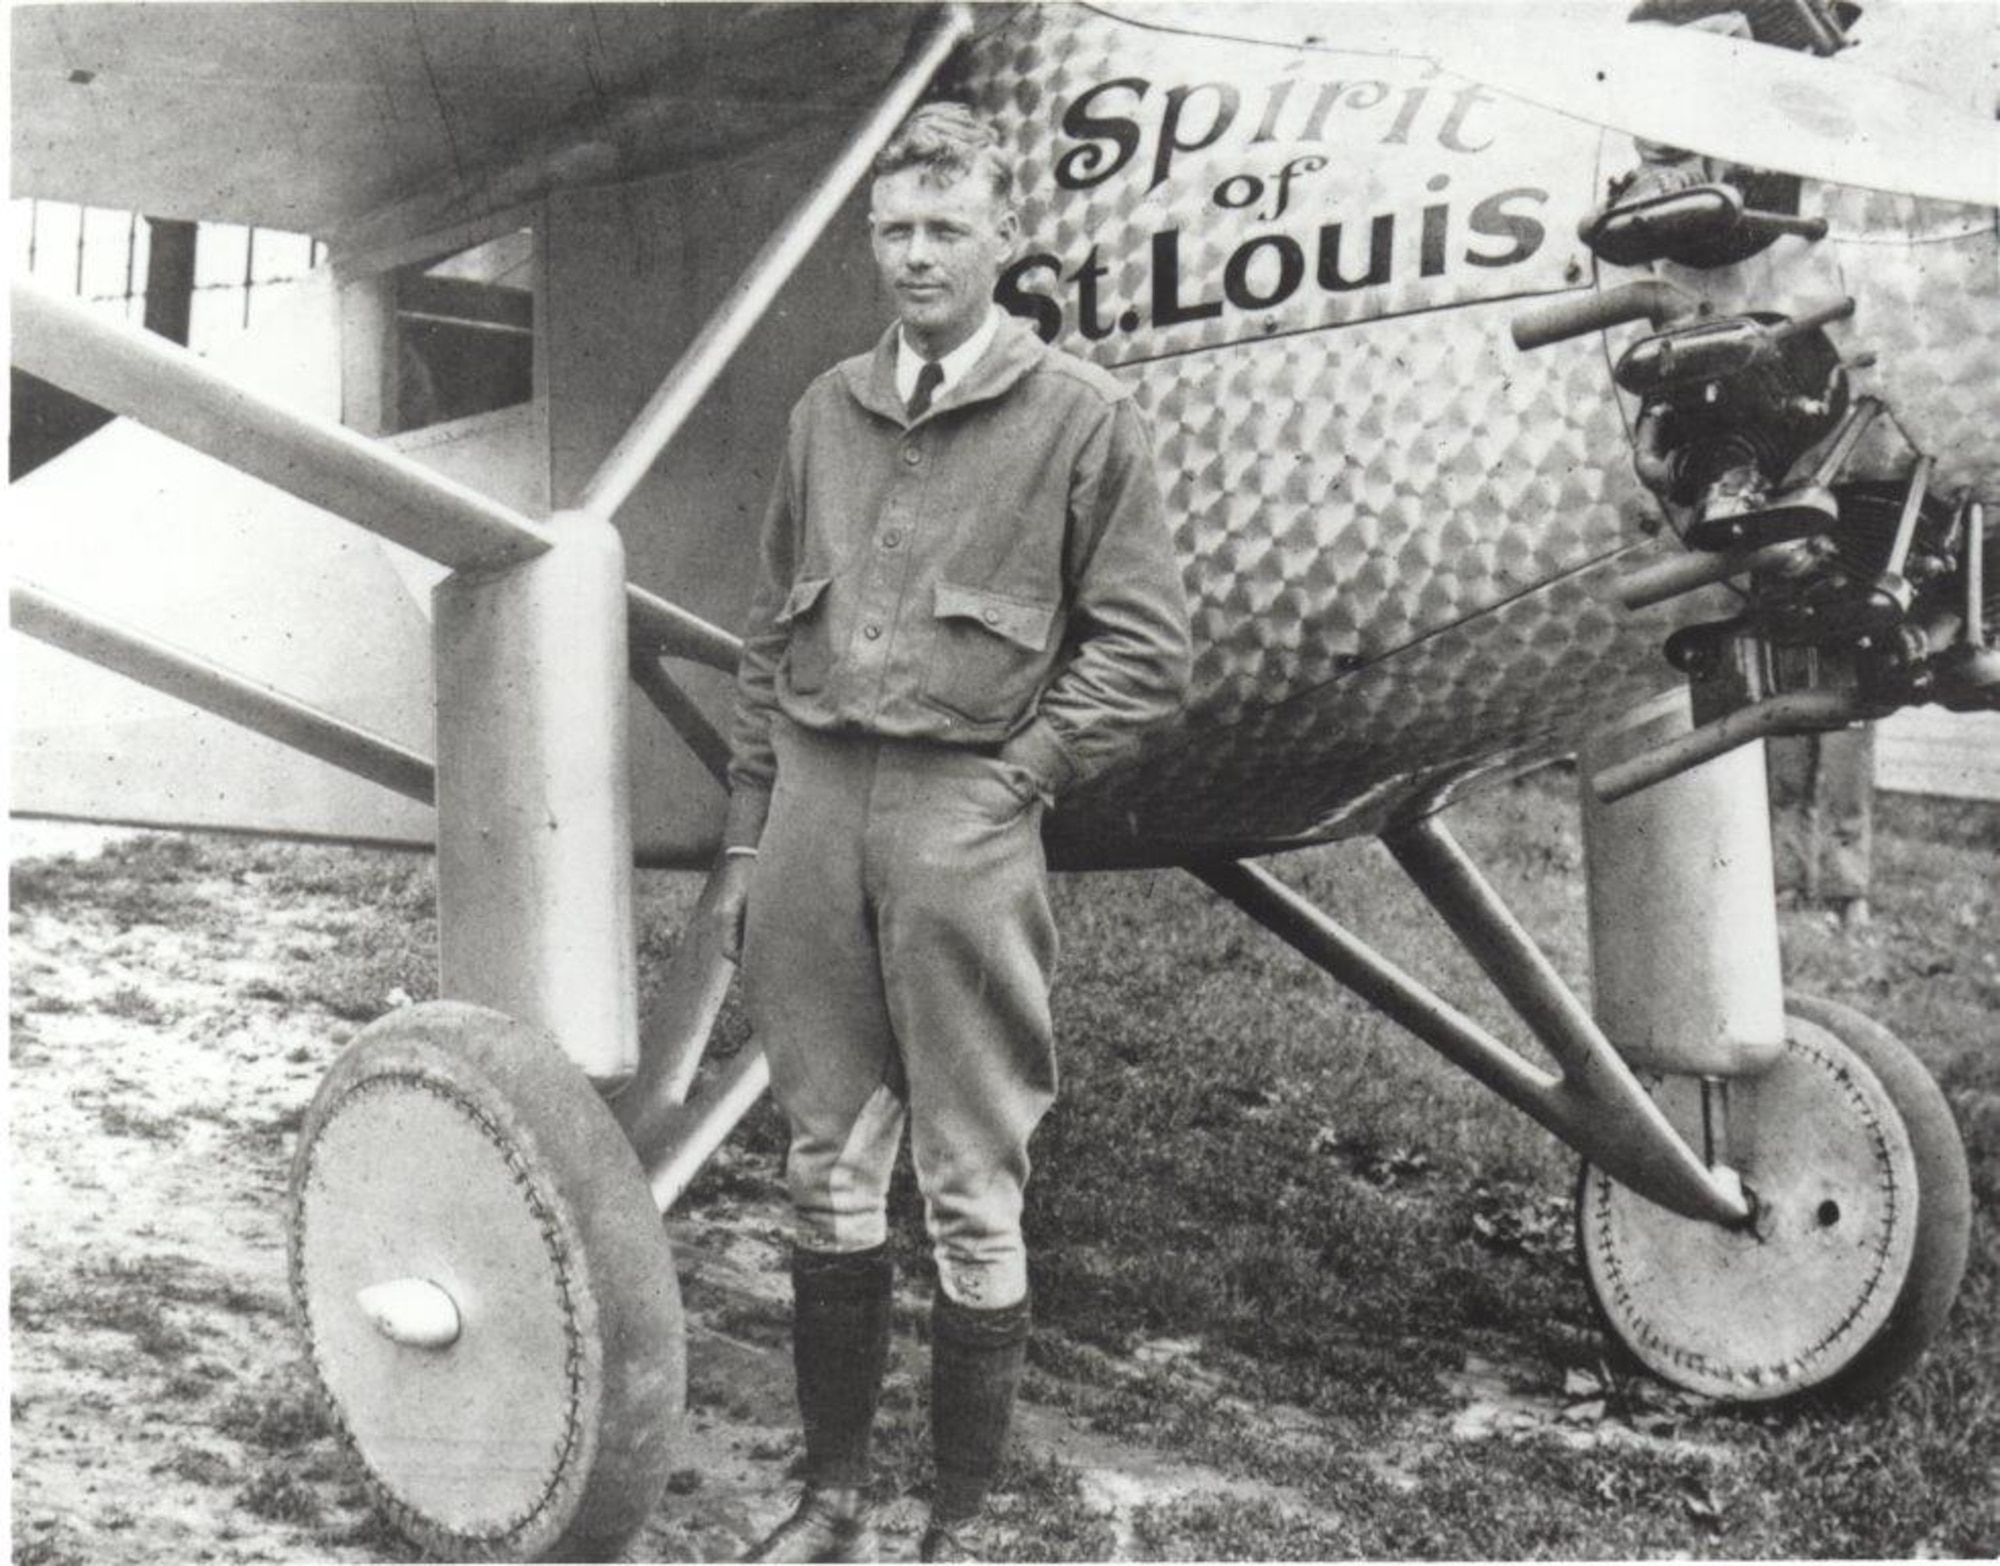 TIL that Charles Lindbergh's Spirit of St. Louis aircraft had no front  window due to fuel tank placement. The only forward vision was by a  periscope. : r/todayilearned